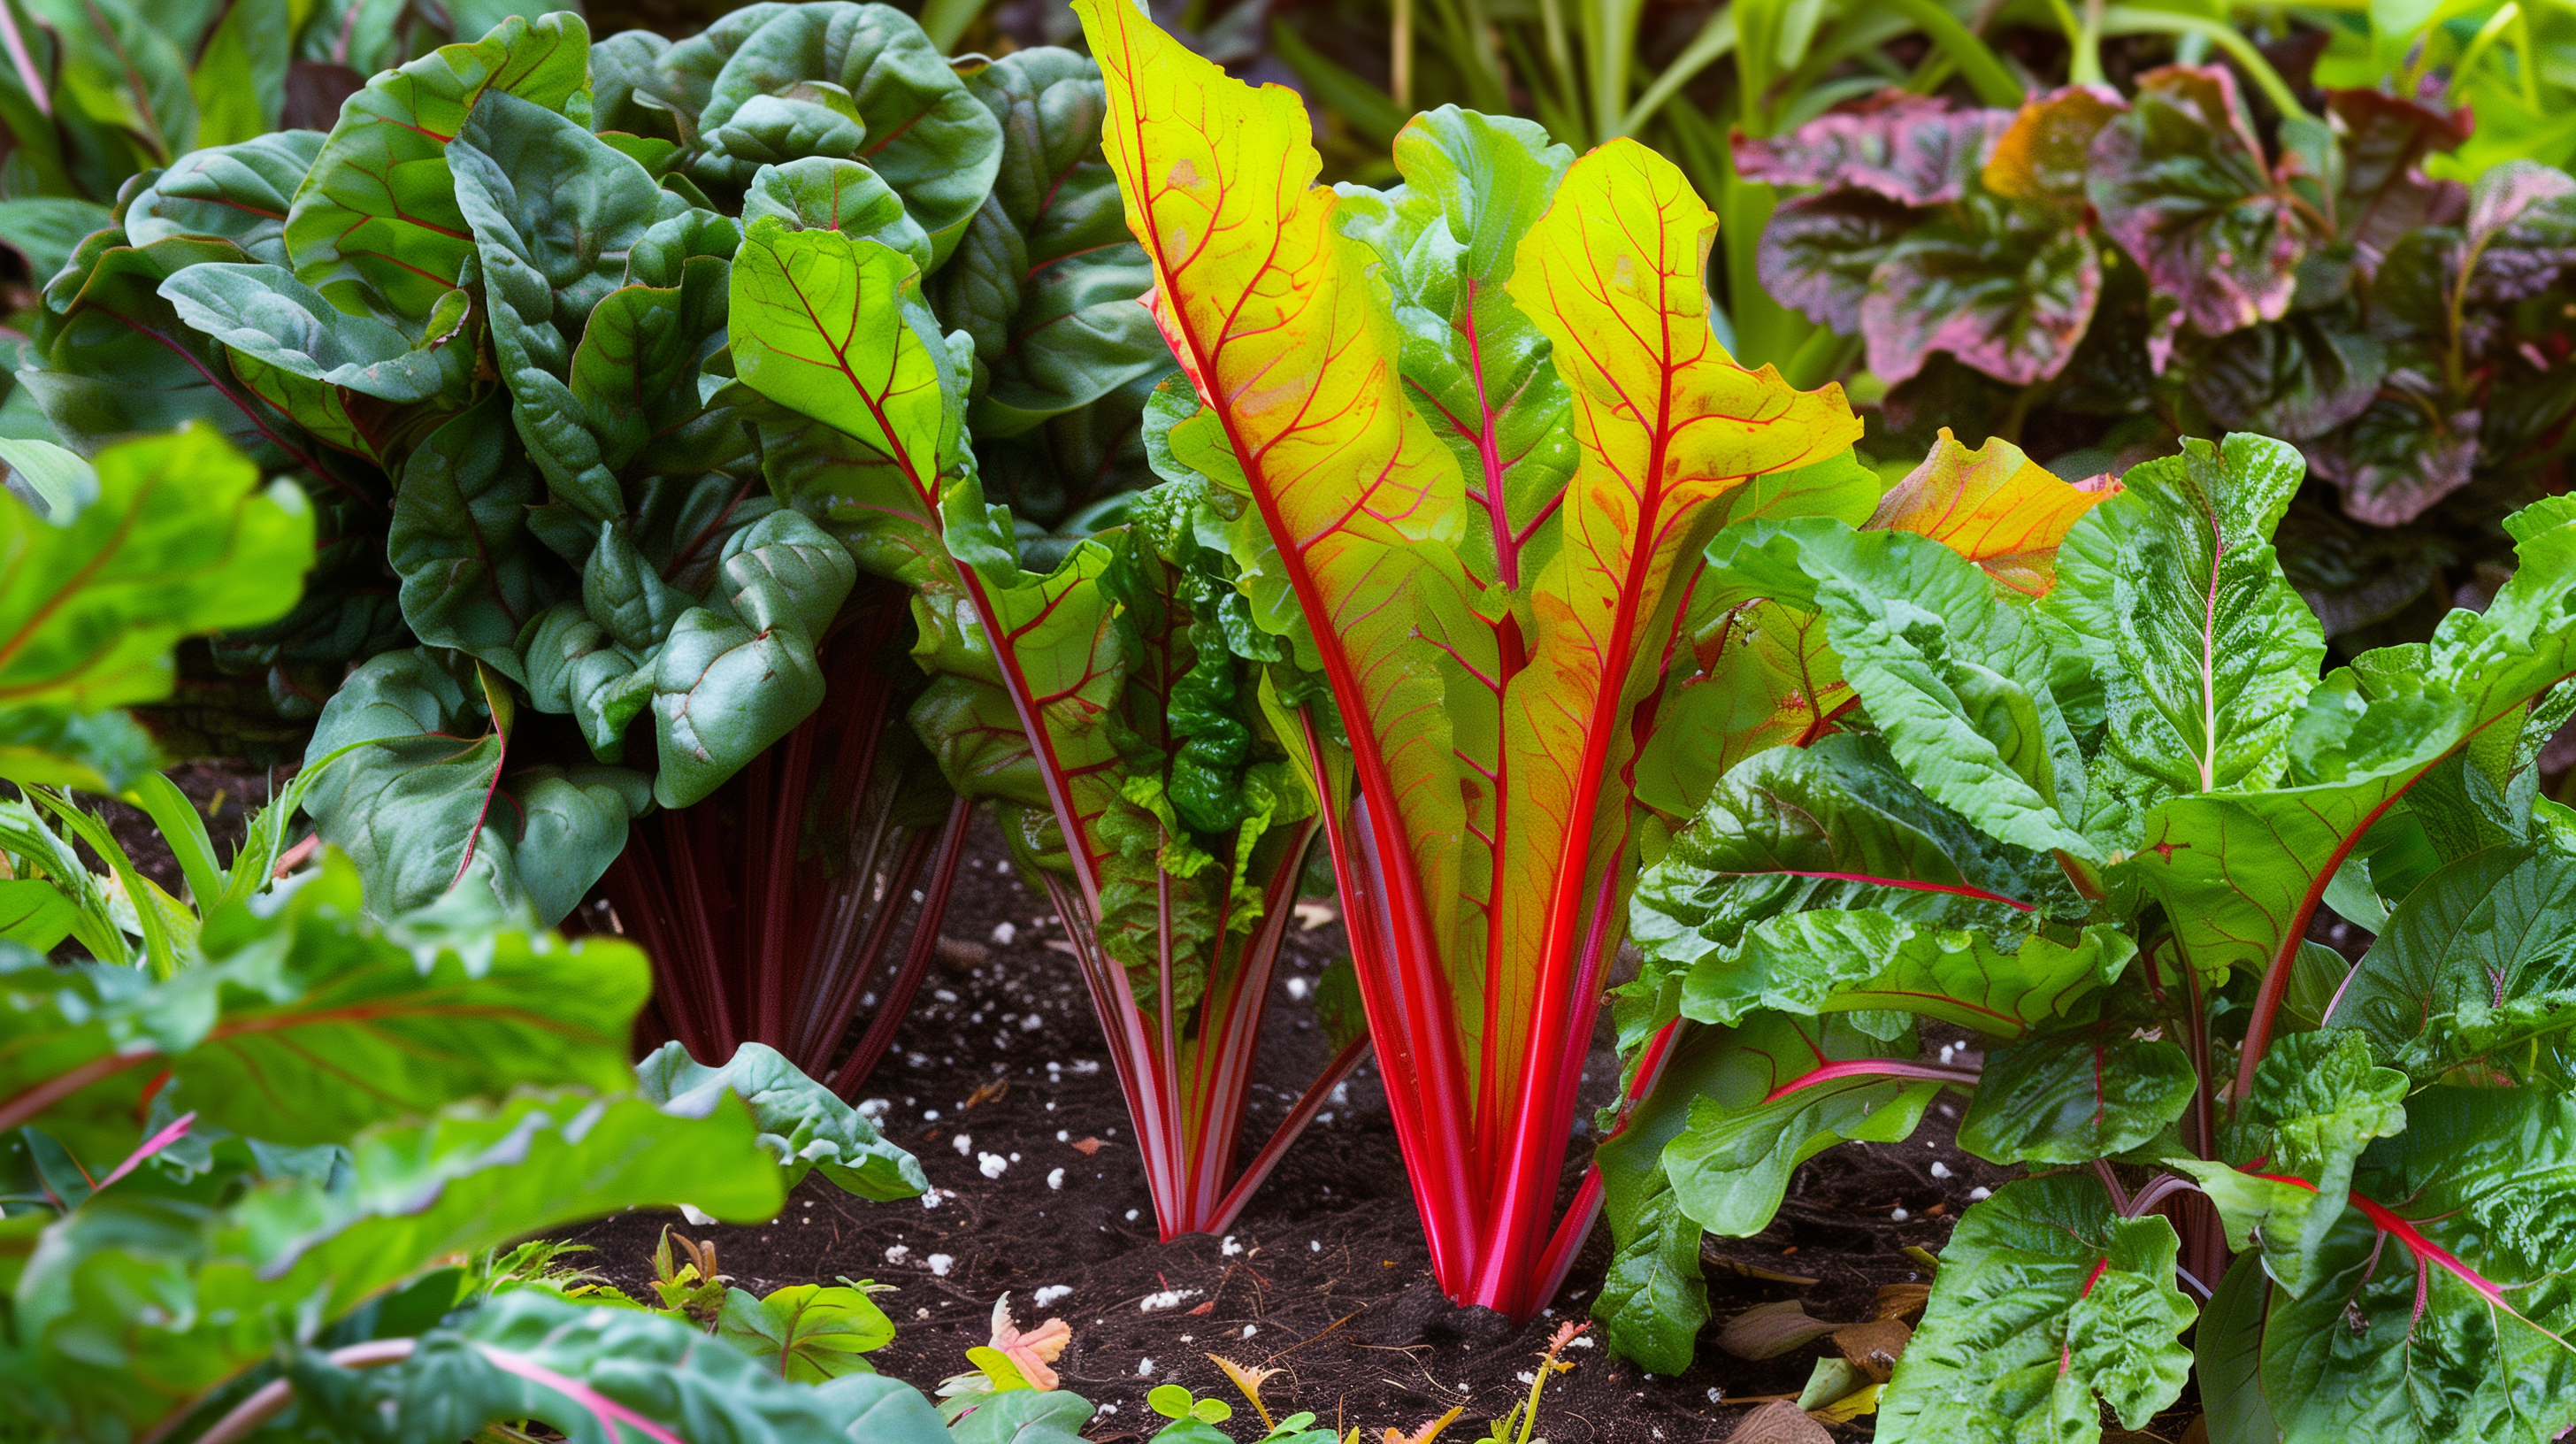 vibrant garden with lush Swiss chard and spinach plants,